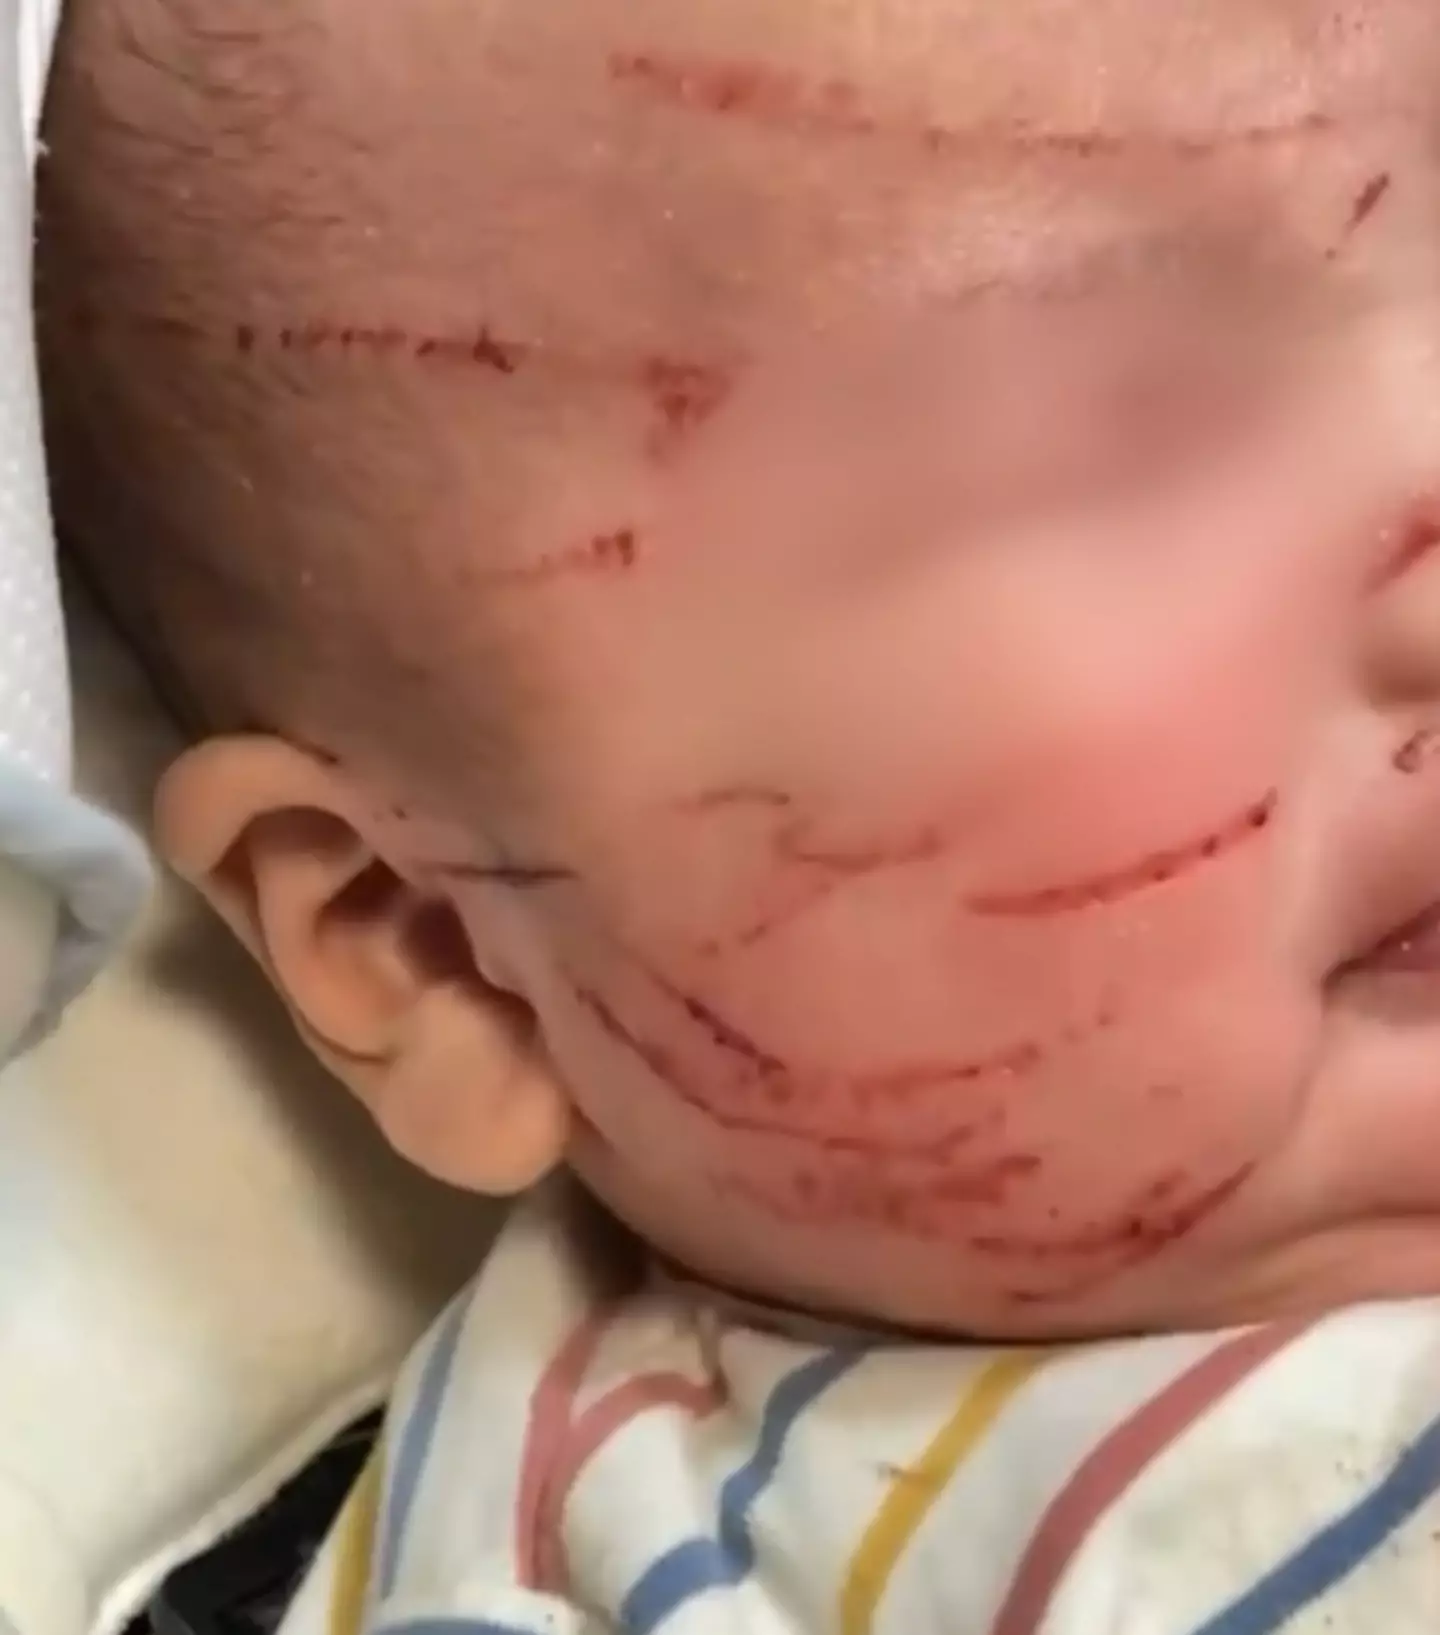 The baby's face has 'severe scratches'.